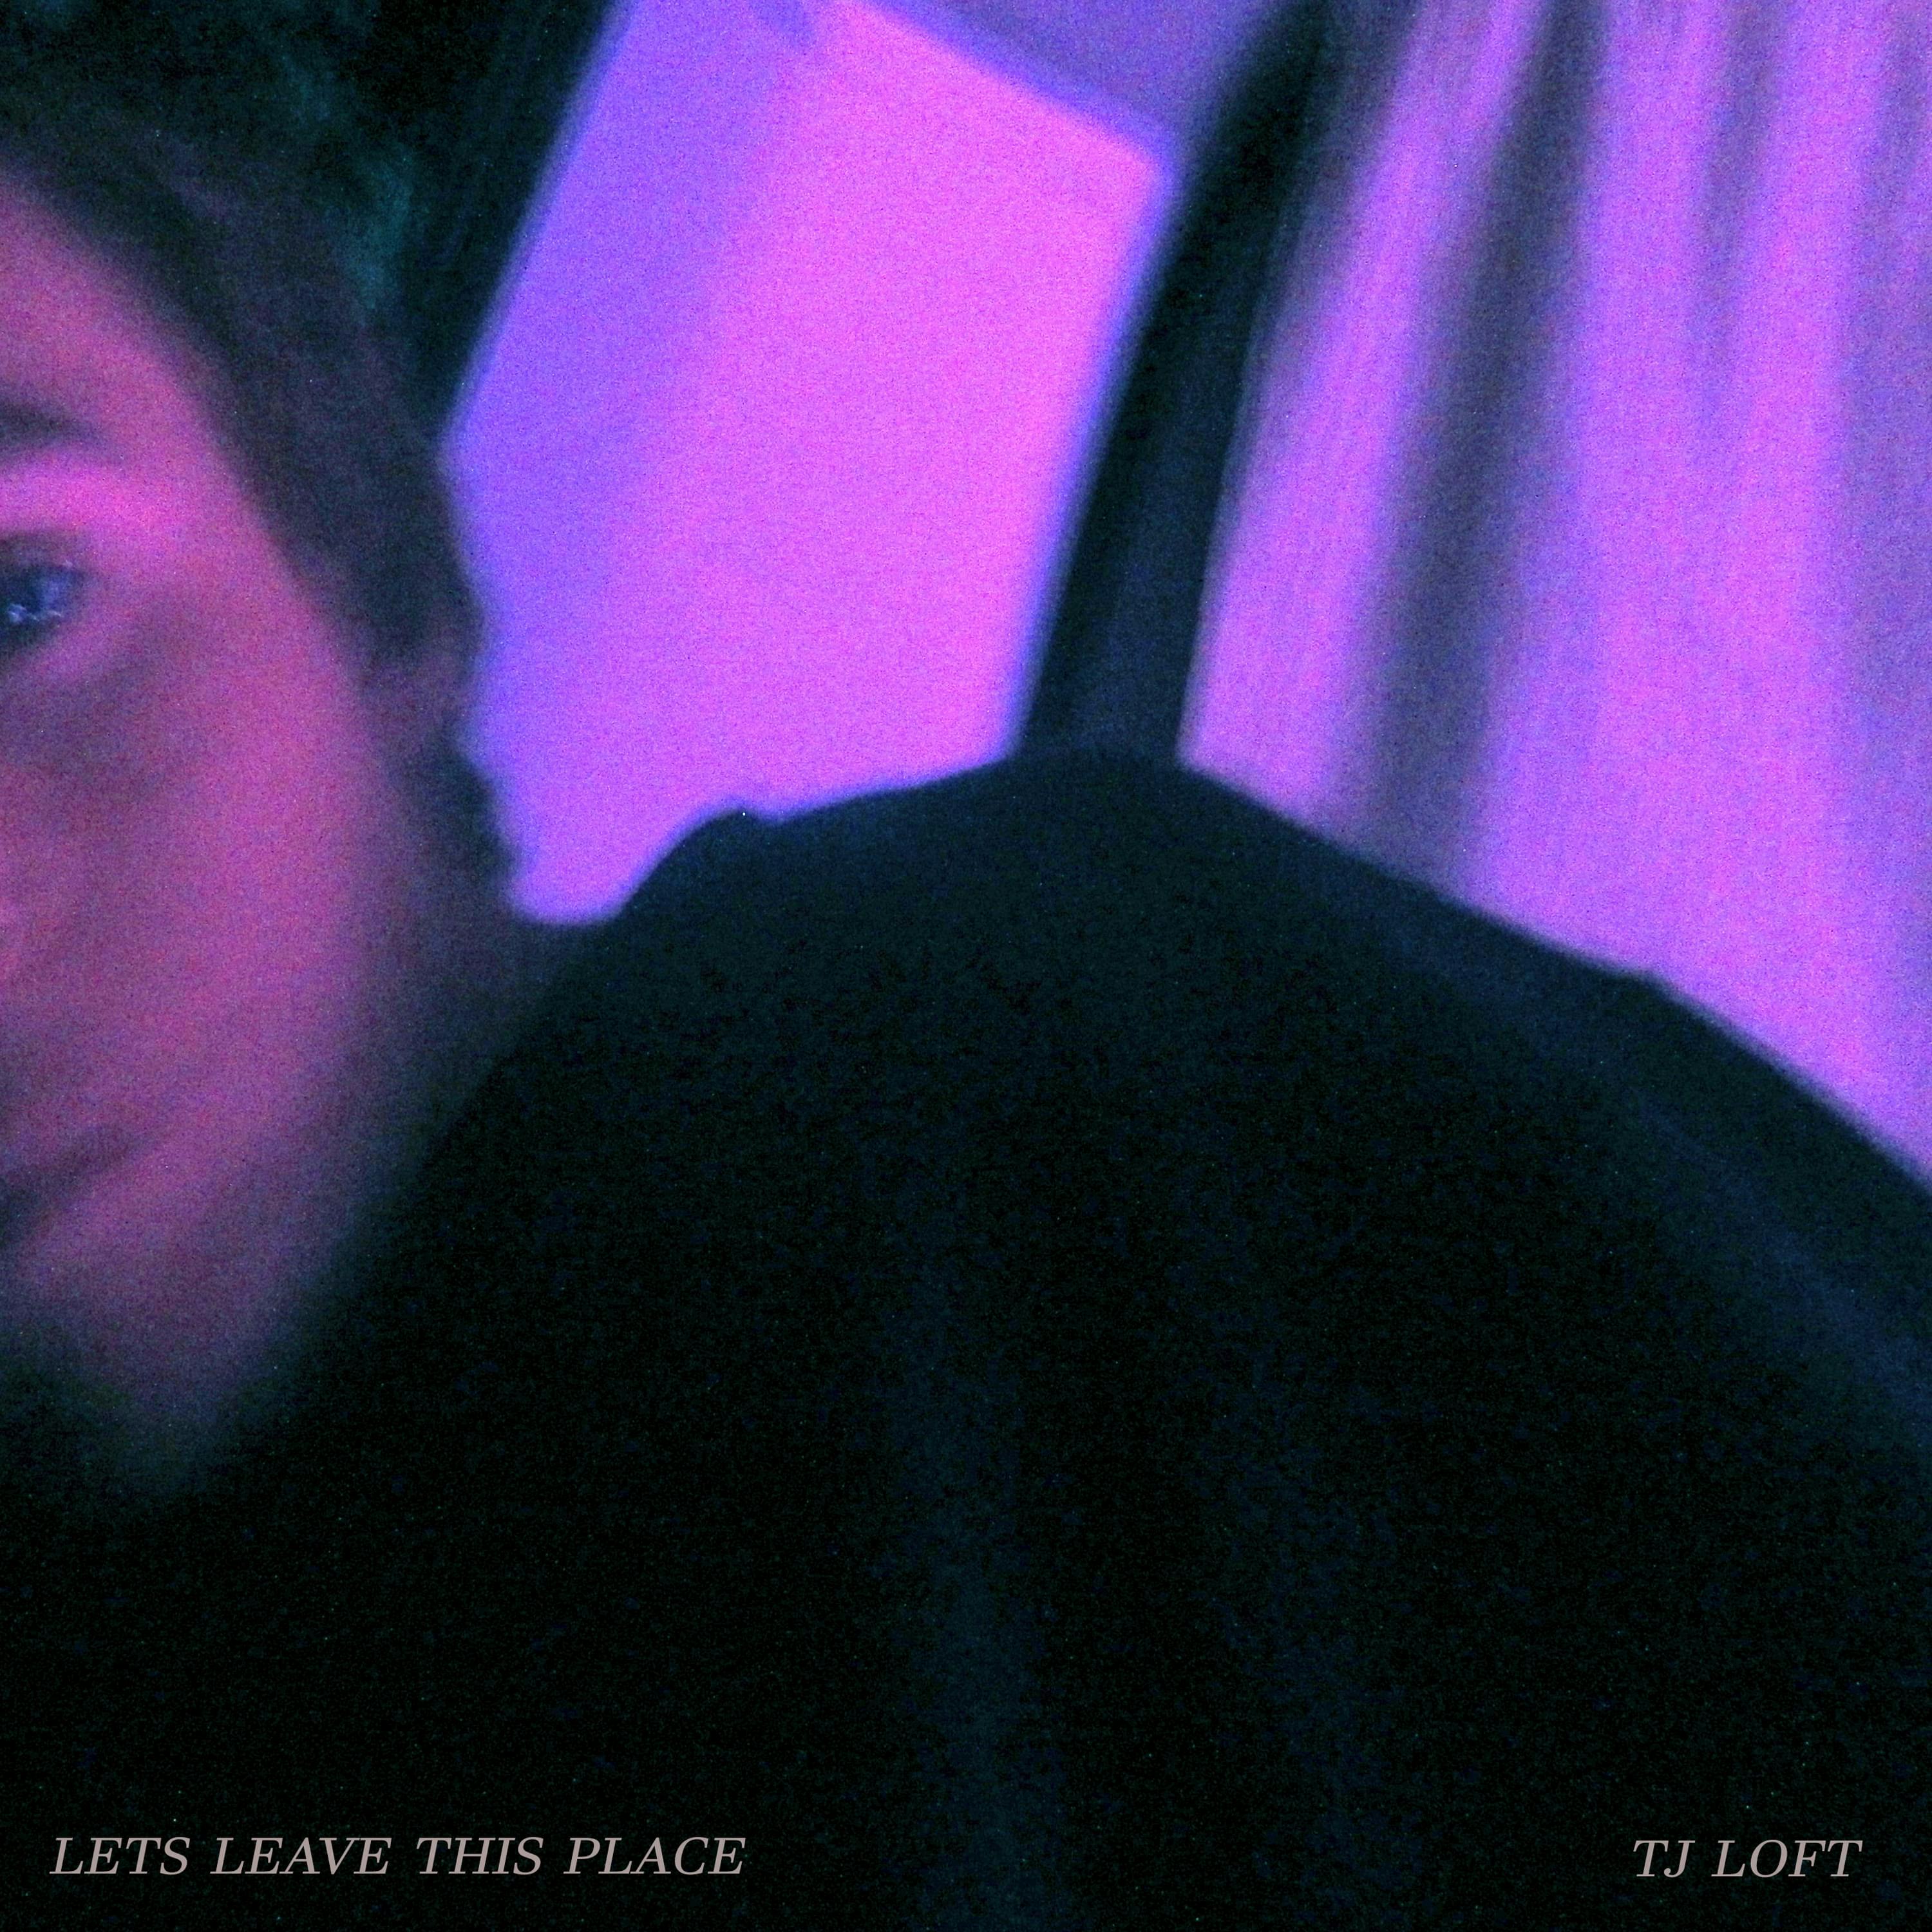 Cover art for Let's Leave This Place by Tj Loft